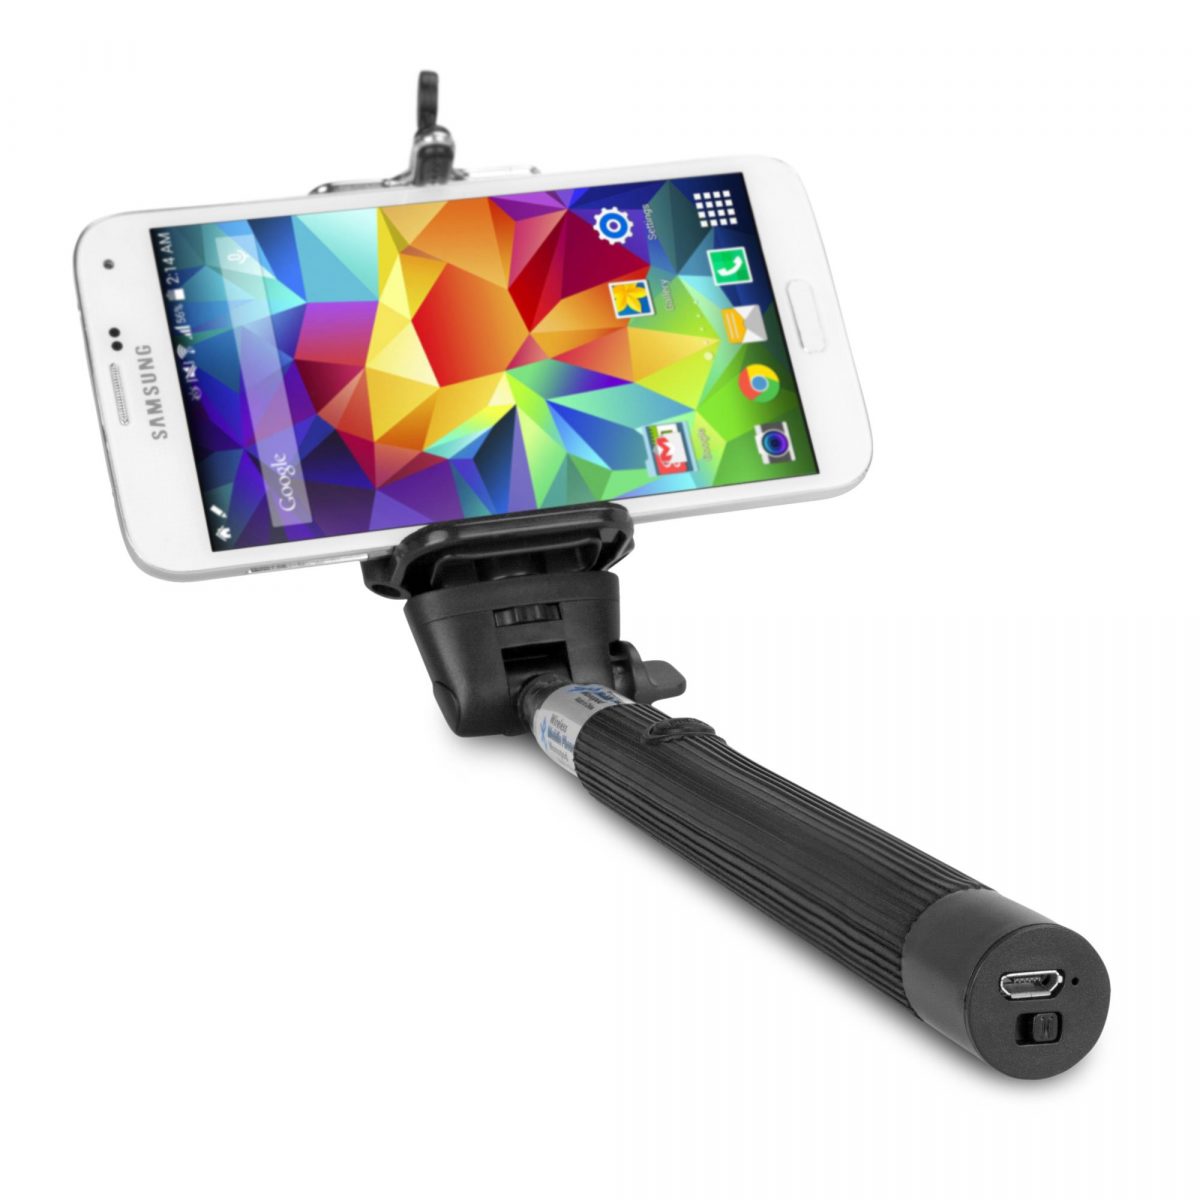 pairing-your-monopod-with-samsung-devices-a-user-friendly-guide